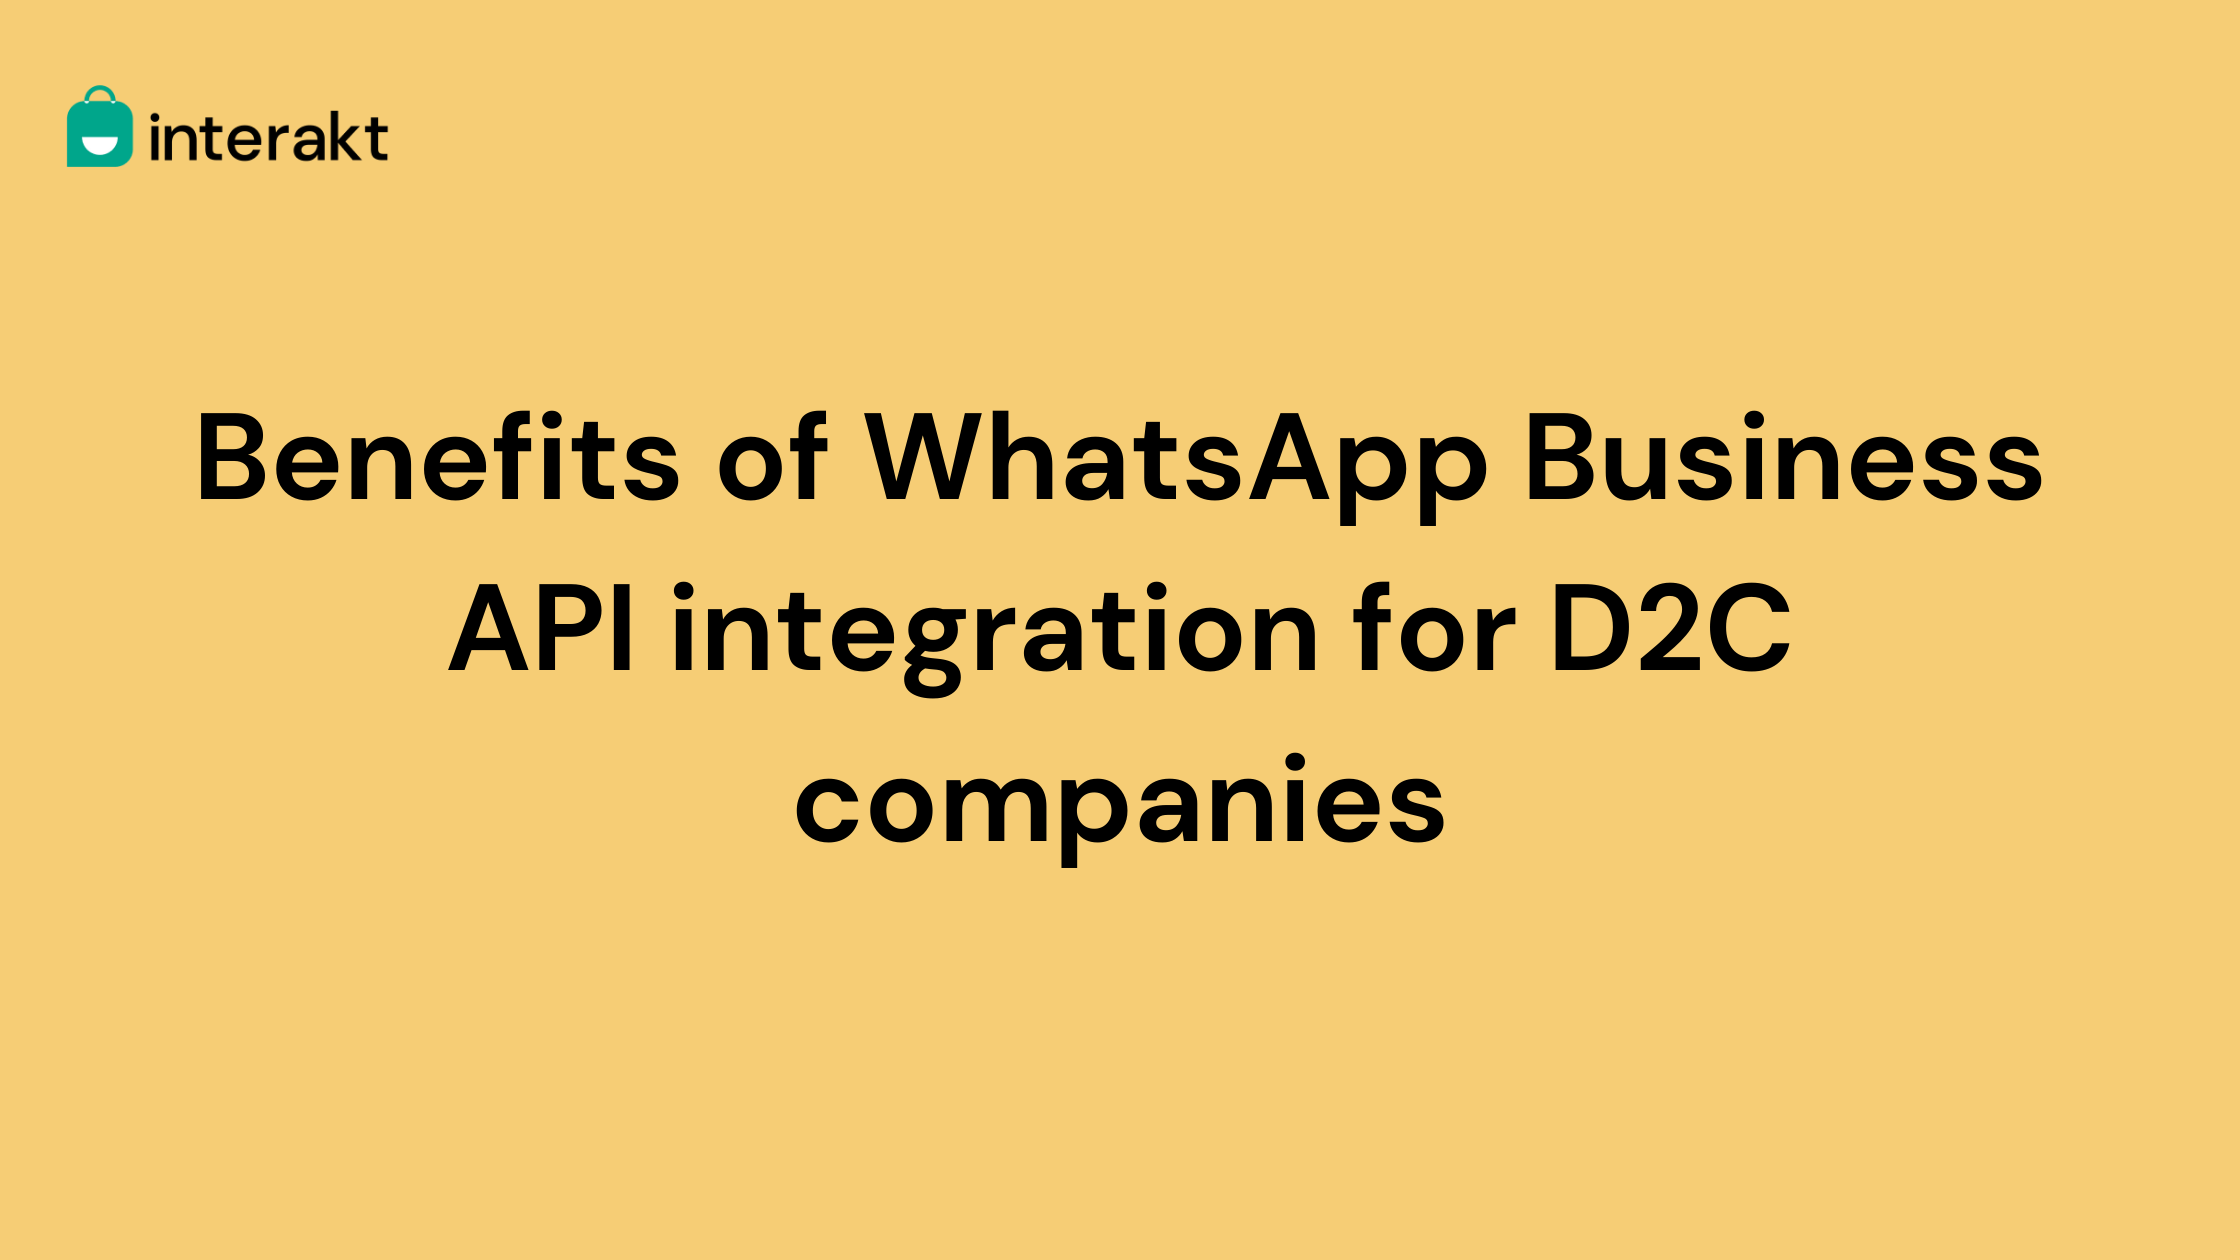 Benefits of WhatsApp Business API integration for D2C companies